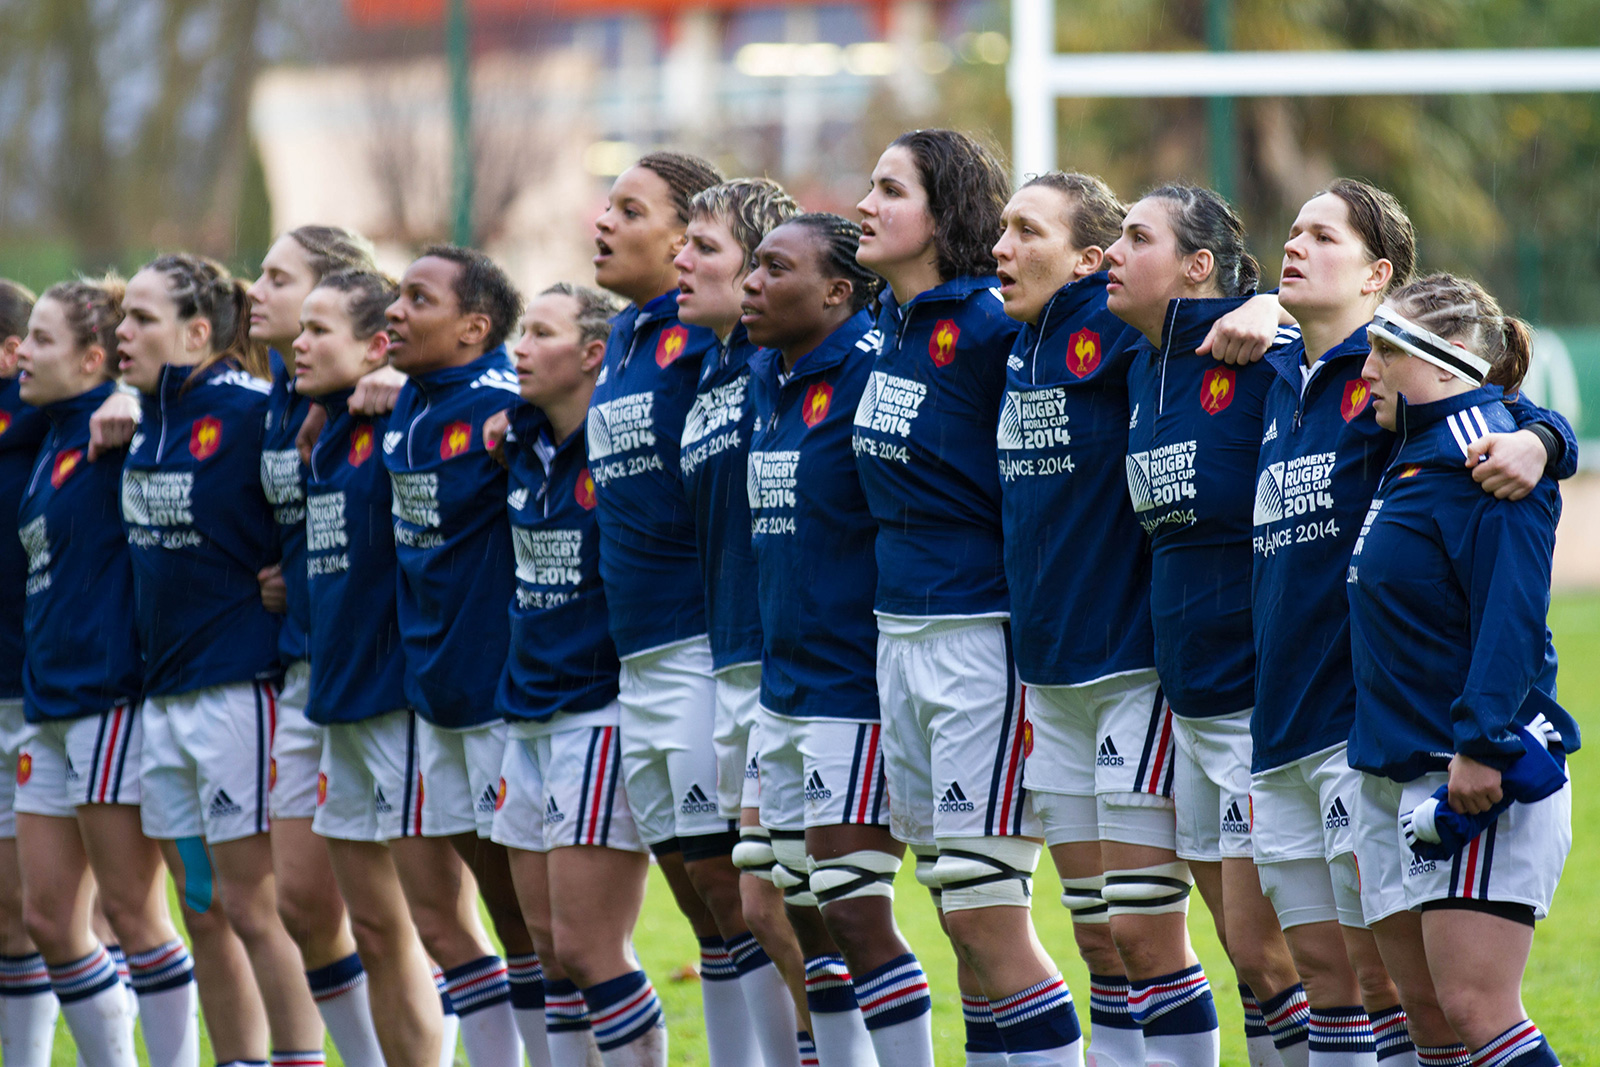 Match Rugby France - Pays de Galles en direct streaming live